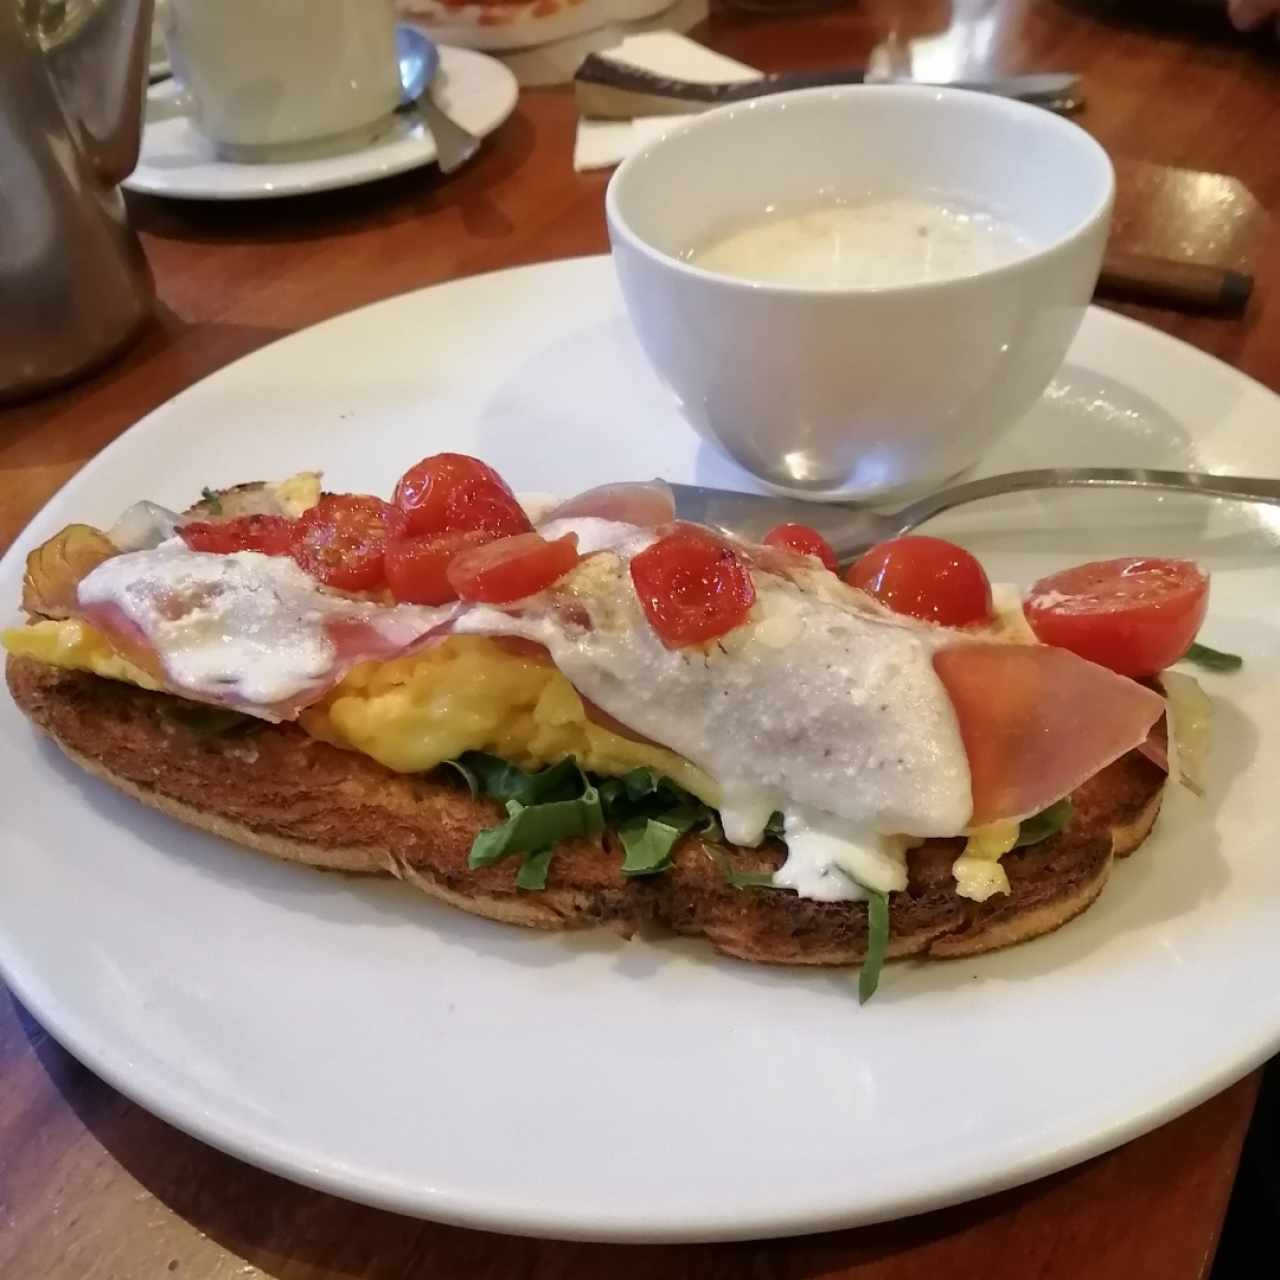 Omelette con Jamón y Queso Suizo